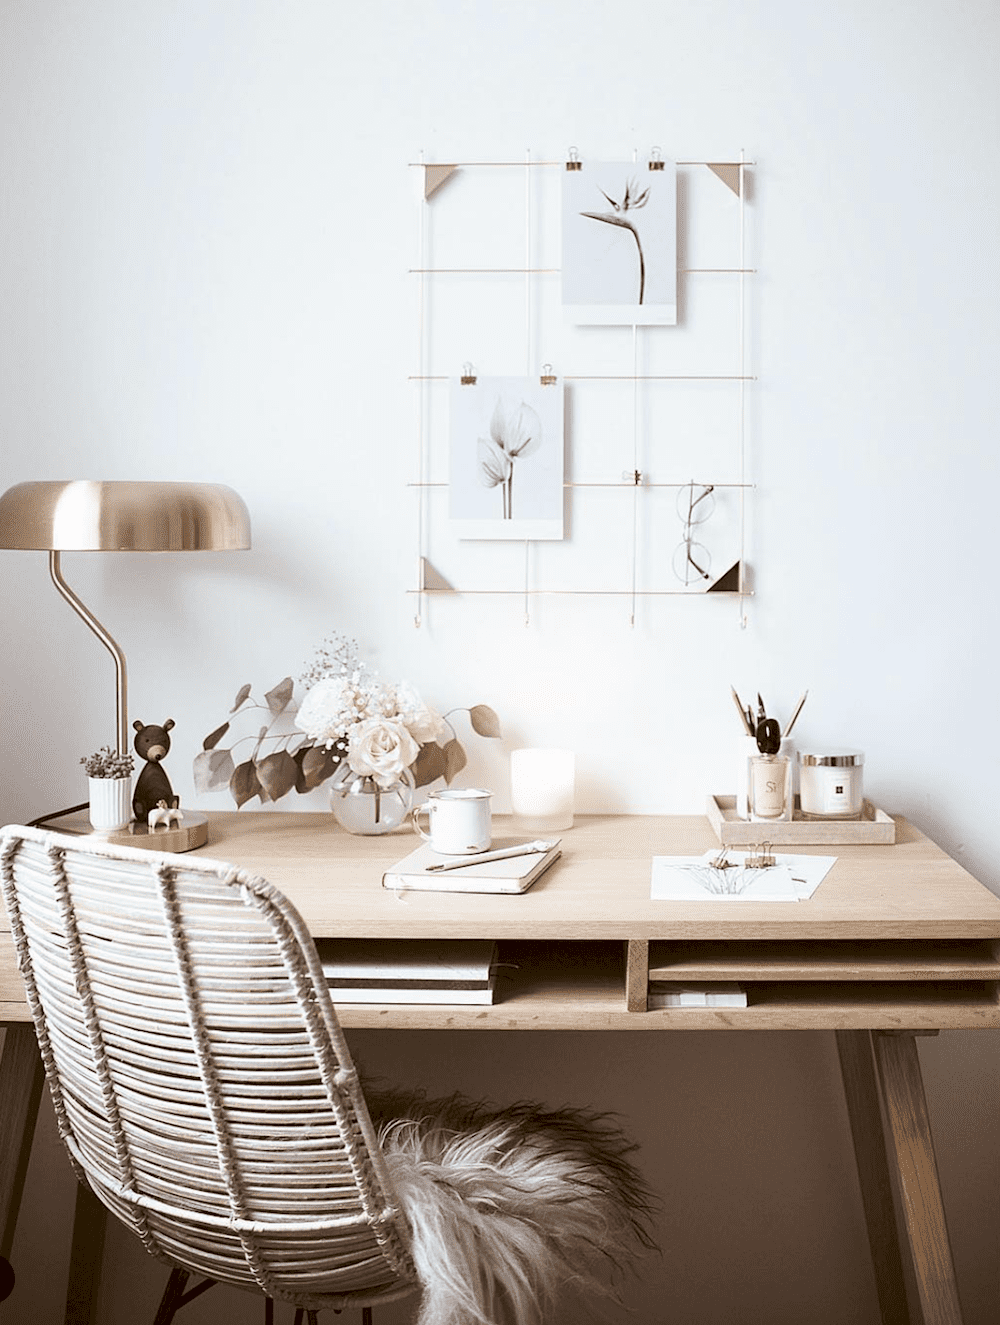 27 Dorm Room Decor Ideas to Make Your New Space Feel Like Home